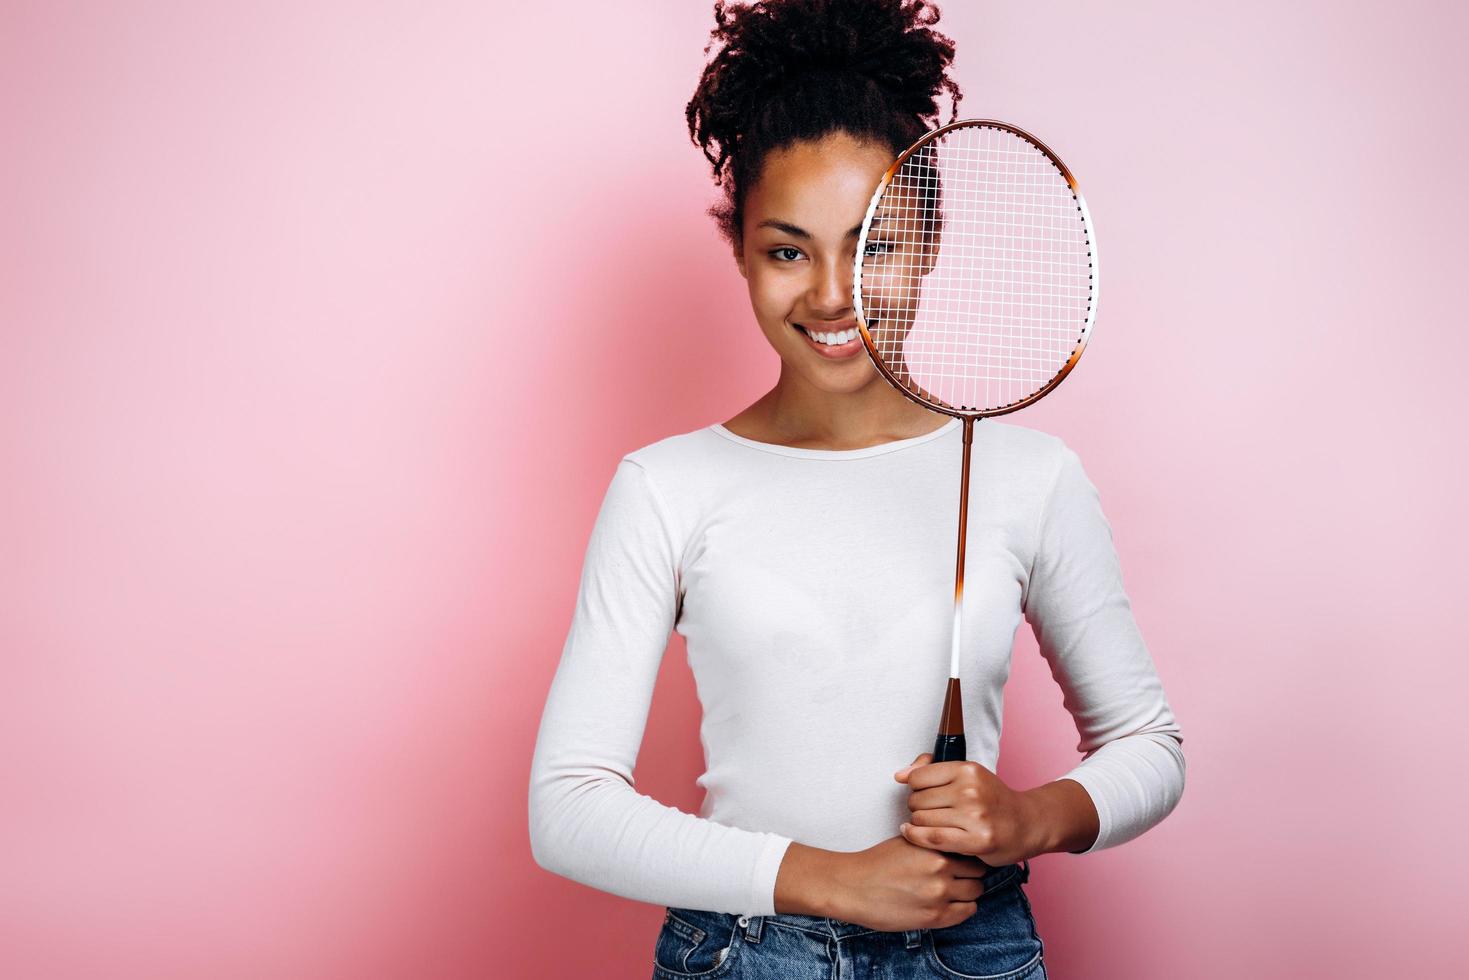 Beautiful, smiling girl stands on a background of a pink wall, covers her face with a racket photo